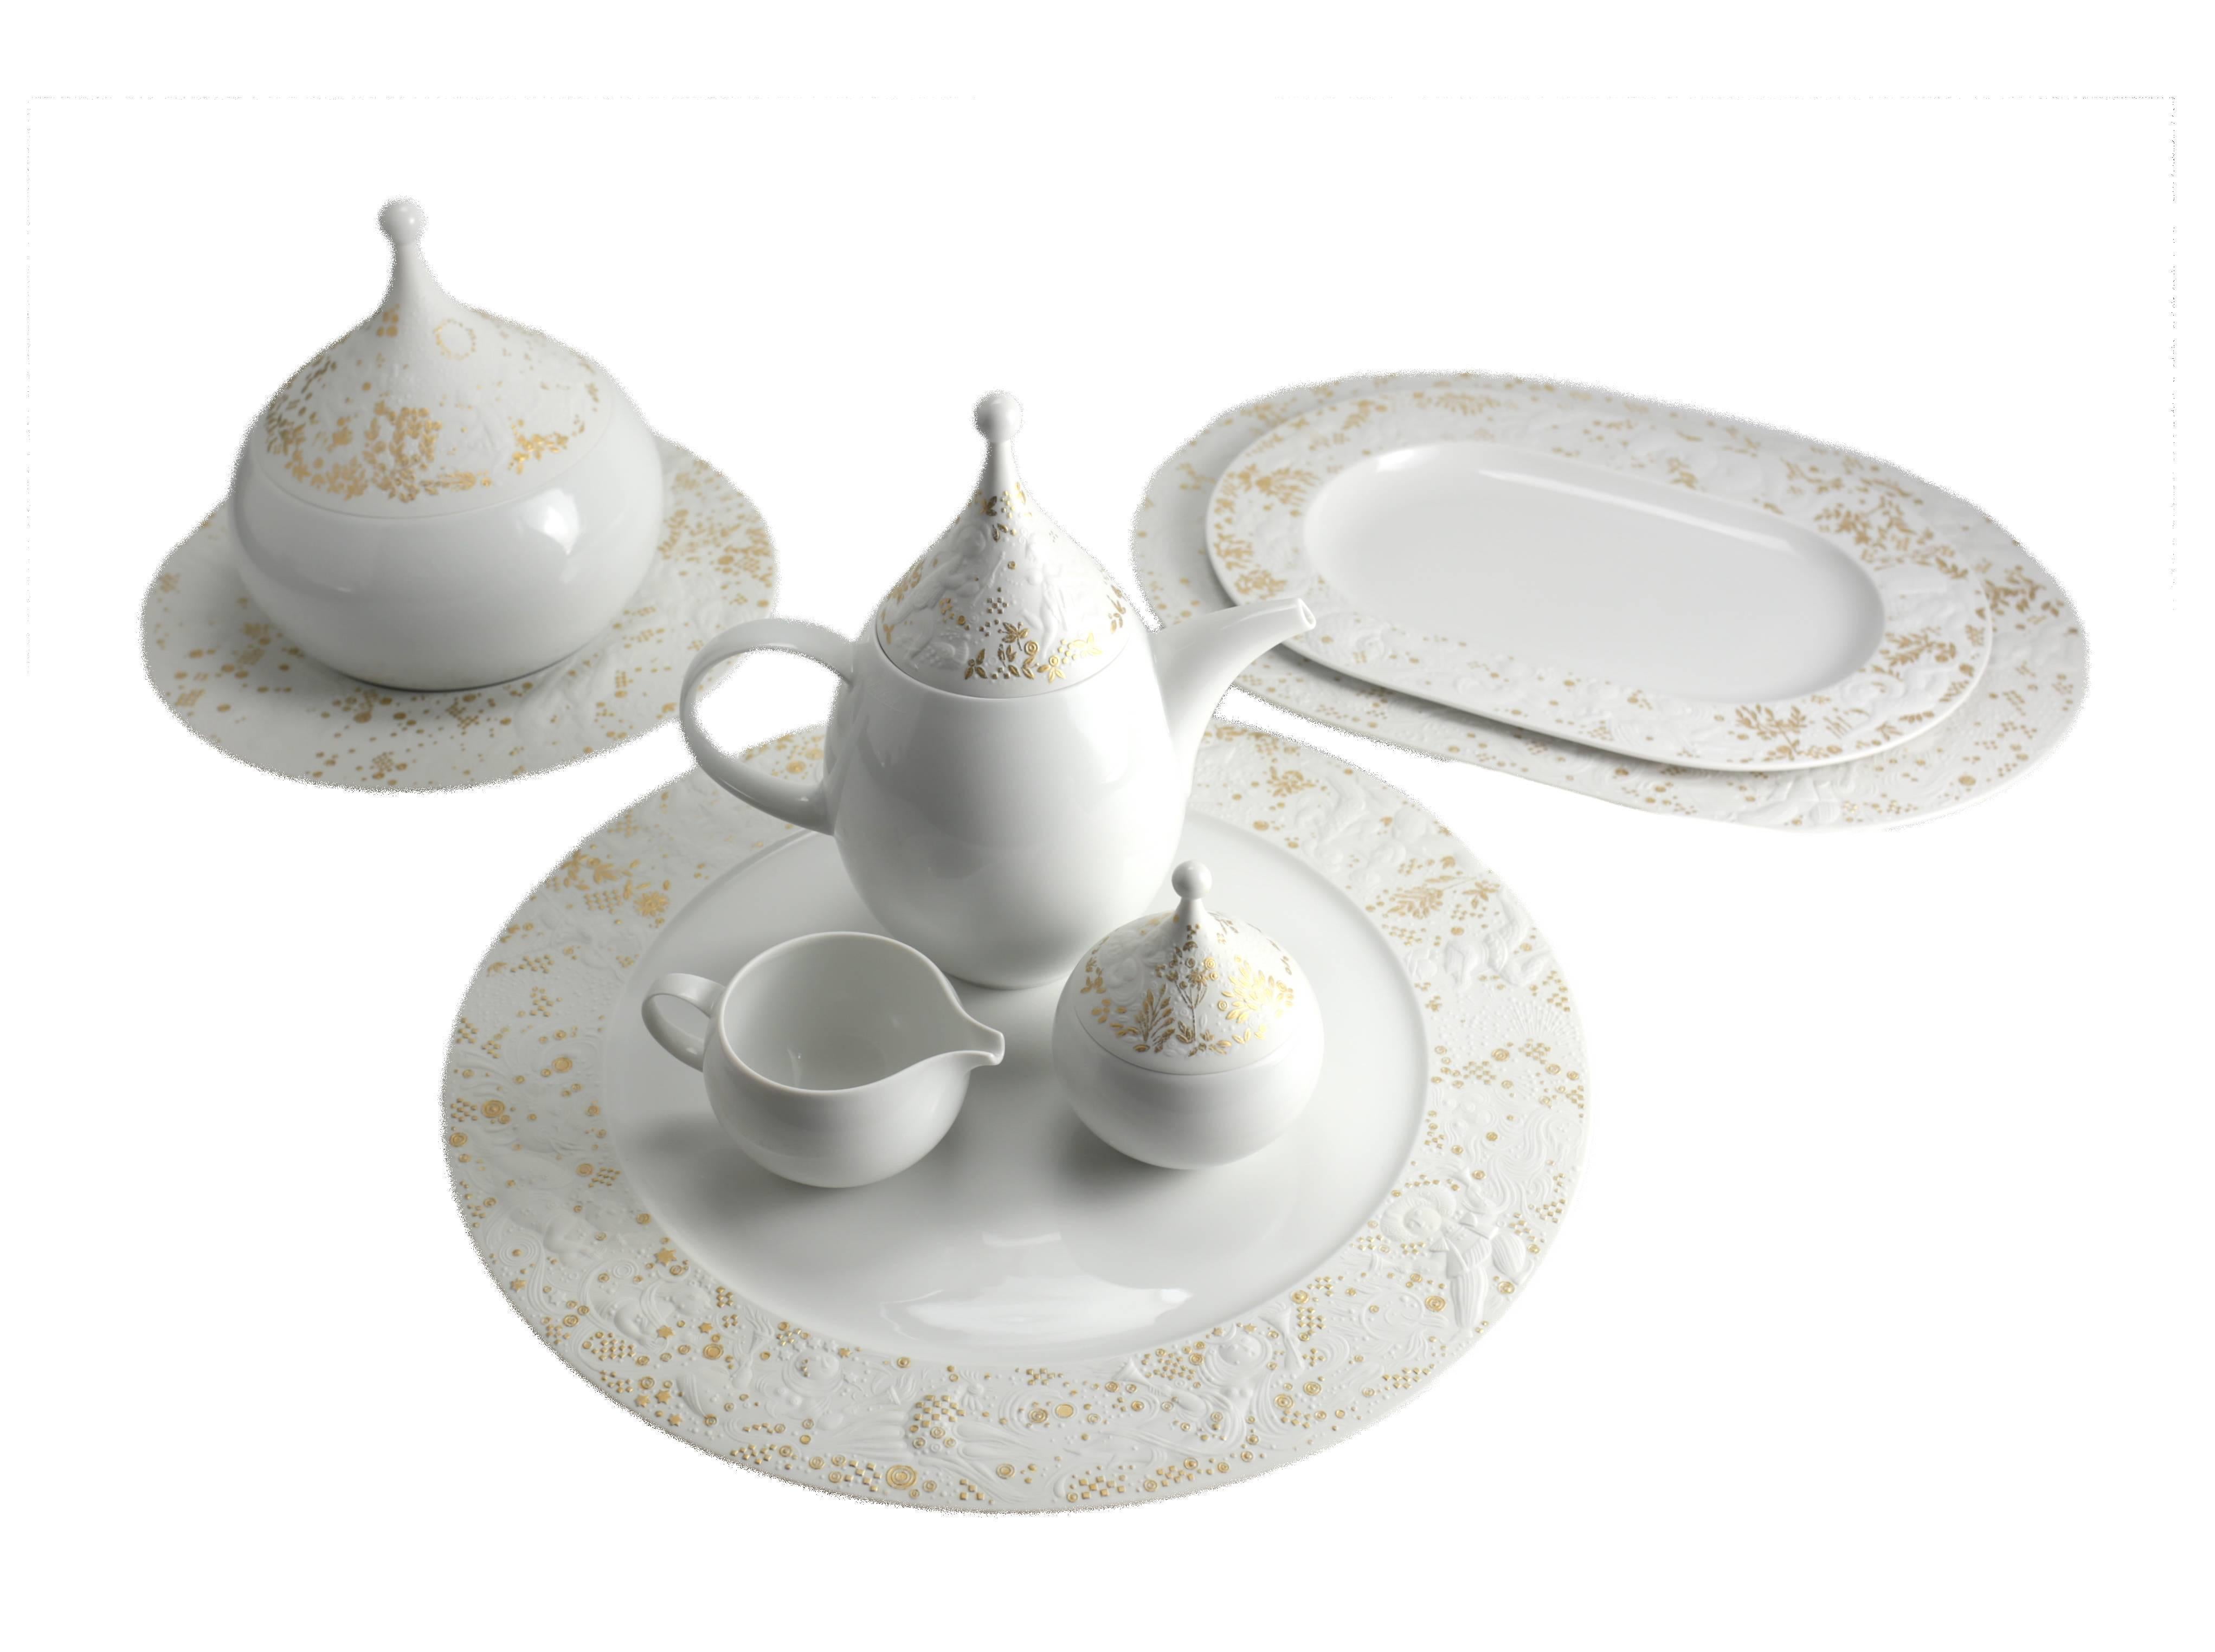 A beautiful and elegant porcelain dinner and coffee service for eight in the Monogramstanos Magic Flute pattern by Rosenthal Germany, designed by Bjorn Wiinblad. The white ground china has subtle gilt highlights, one of five variations of this